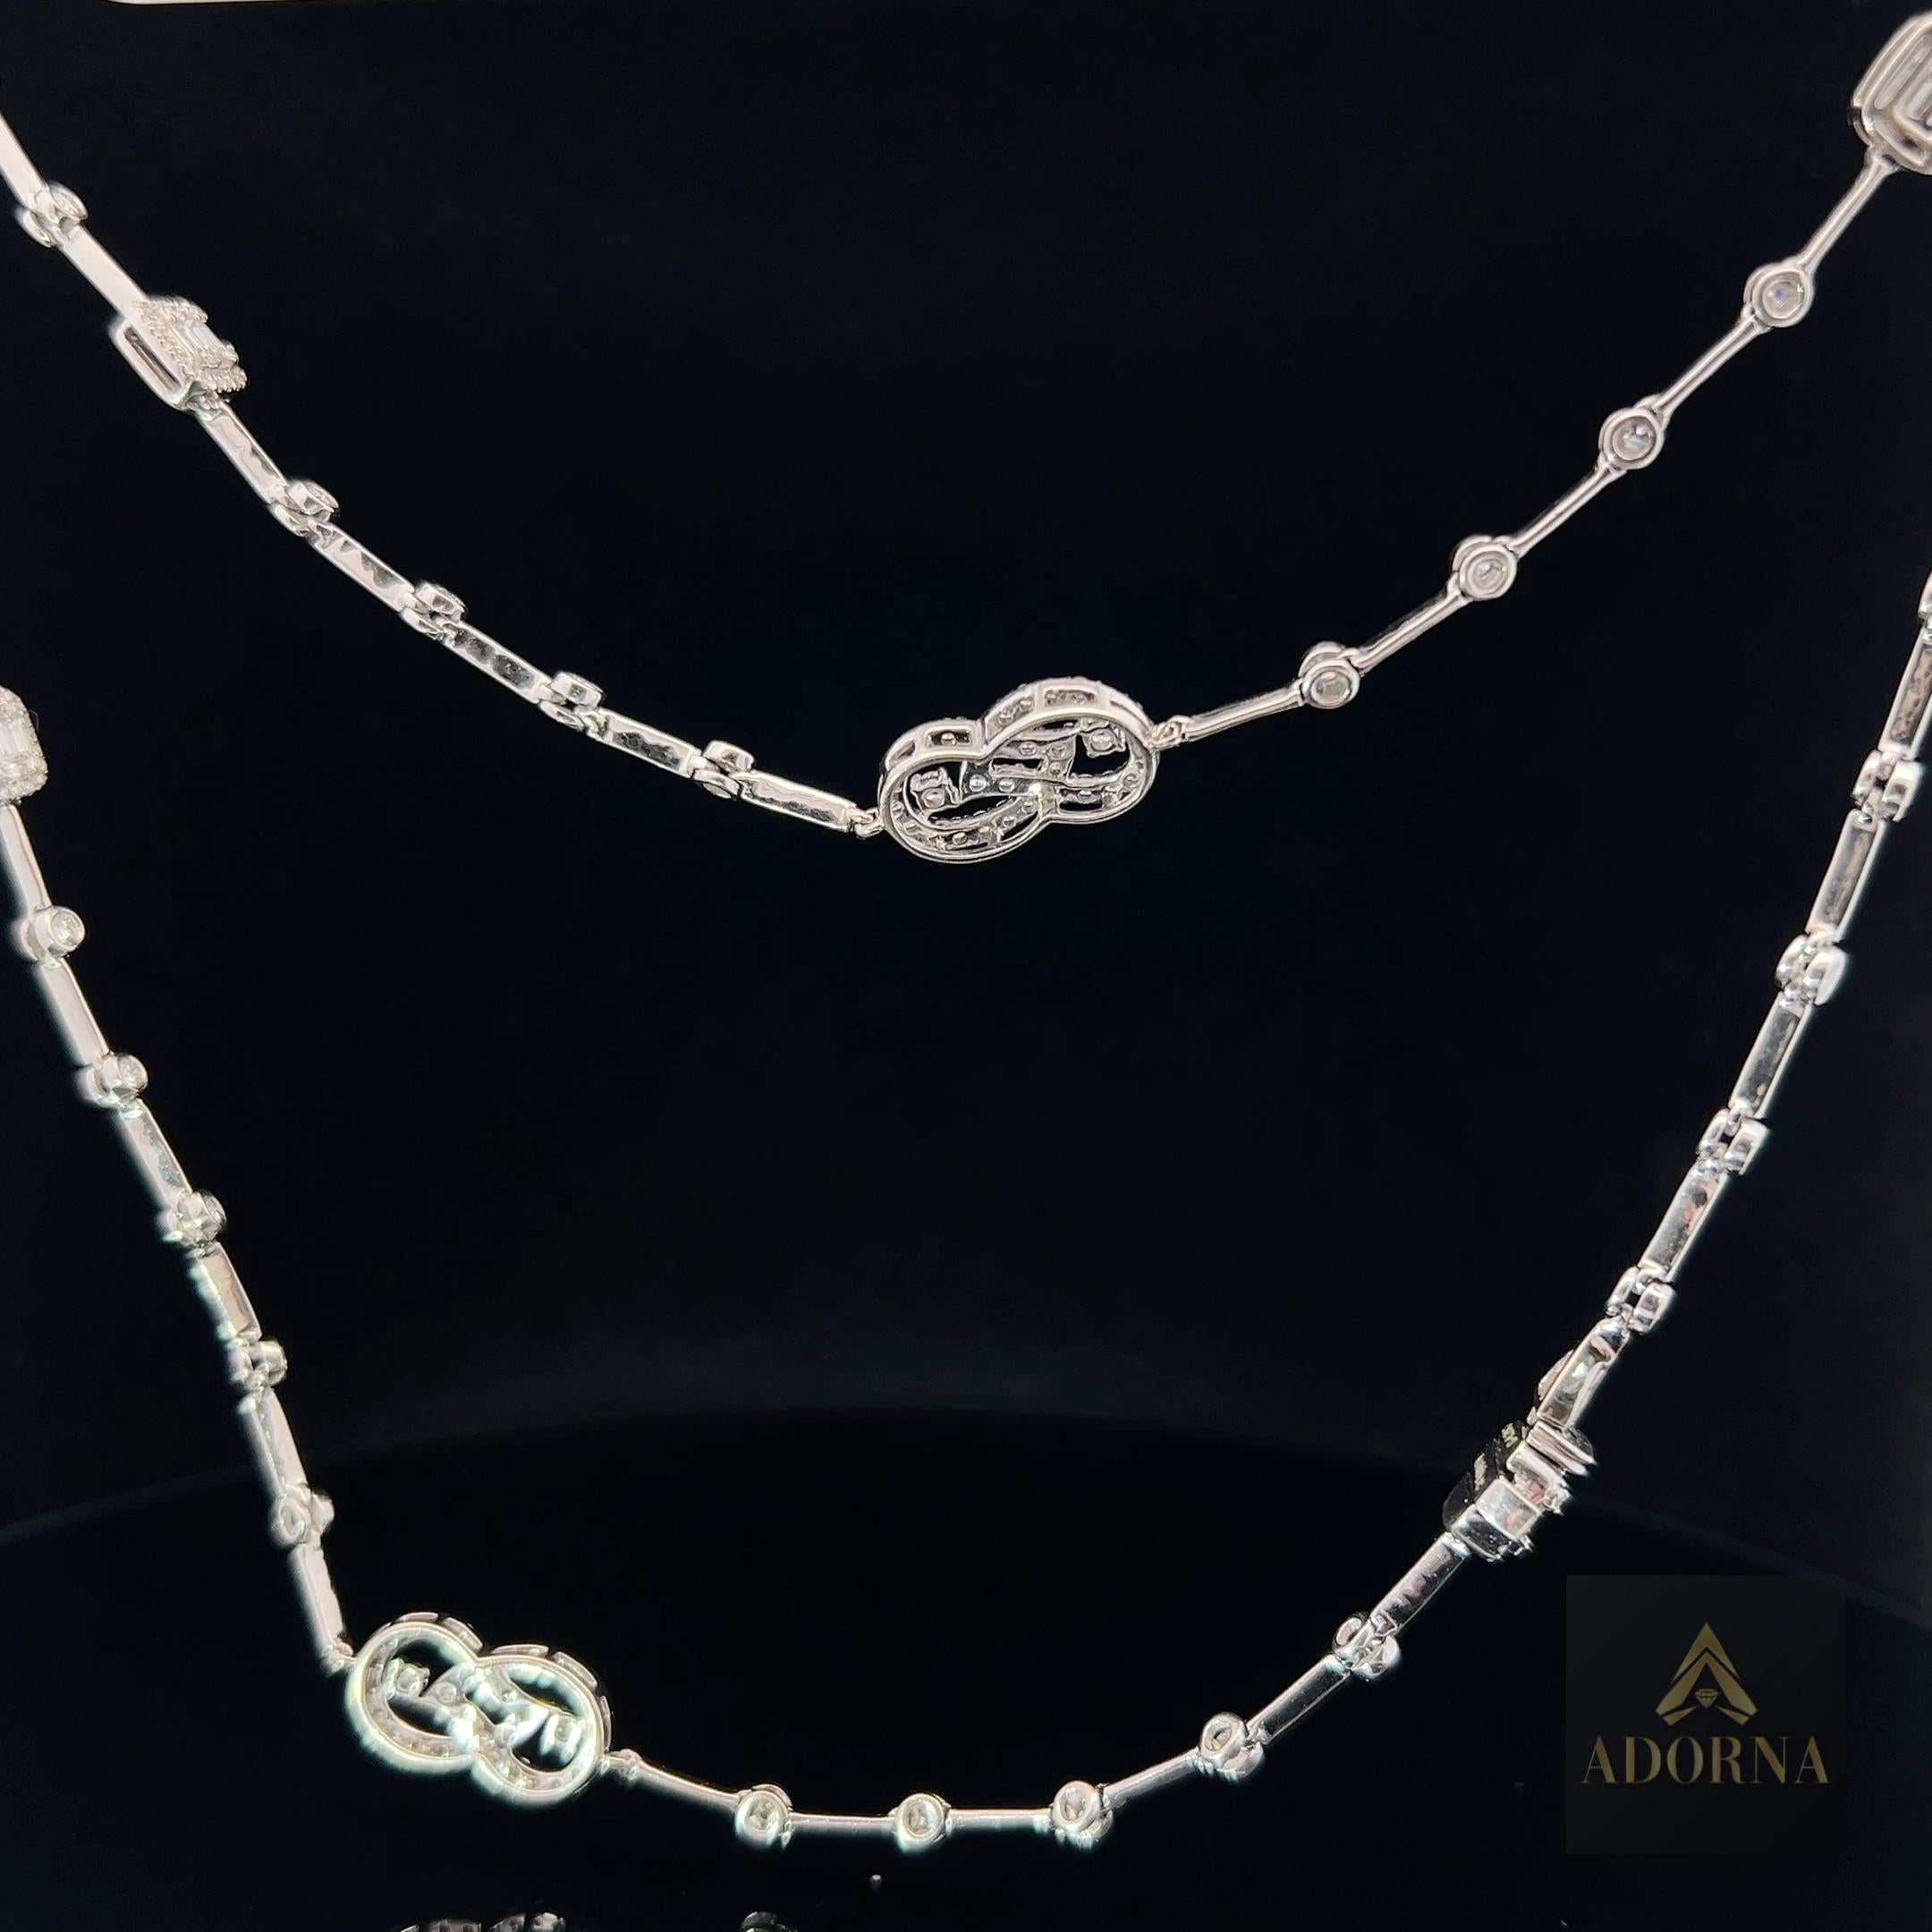 Necklace Information
Diamond Type : Natural Diamond
Metal : 14K
Metal Color : White Gold
Diamond Carat Weight : 6.25ttcw
Lead Time : 4-8 Weeks (If out of Stock)

JEWELRY CARE
Over the course of time, body oil and skin products can collect on Jewelry